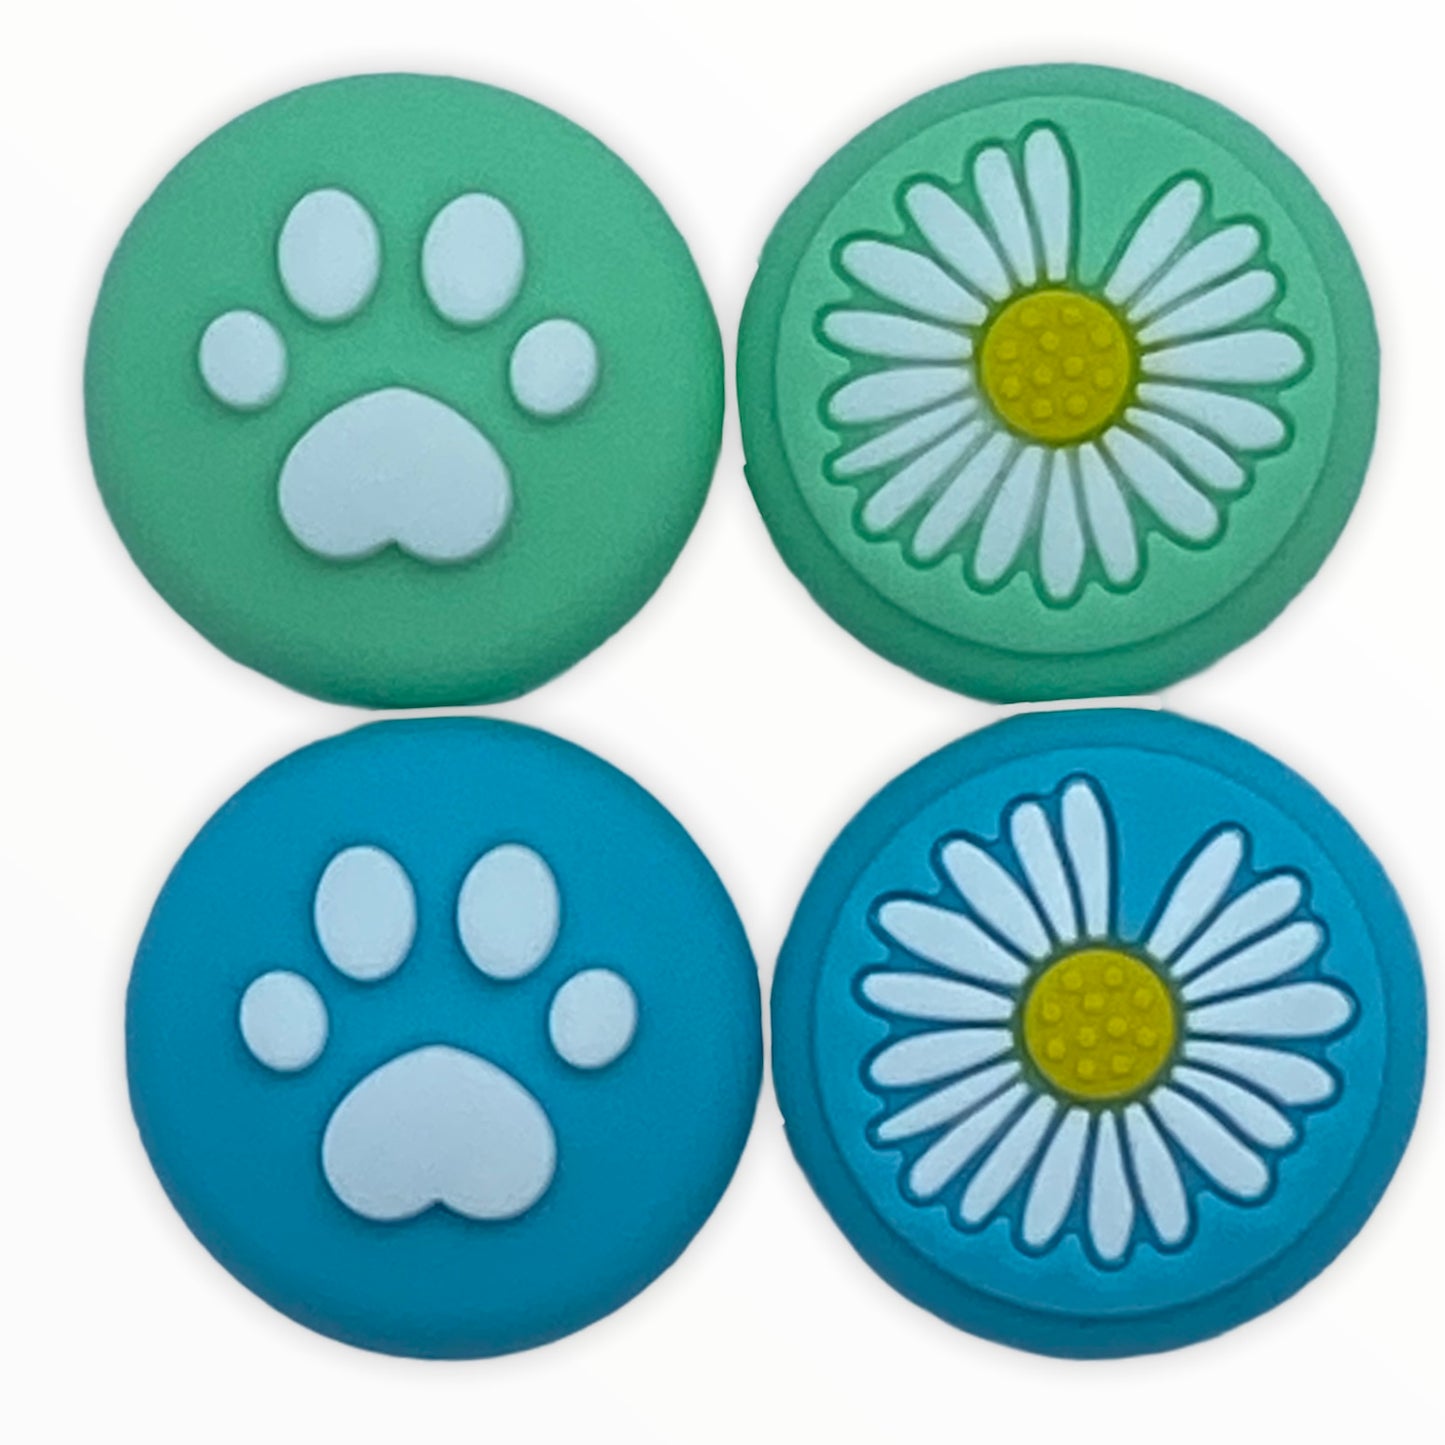 JenDore Blue Green 4Pcs Paw Flower Silicone Thumb Grip Caps for Nintendo Switch